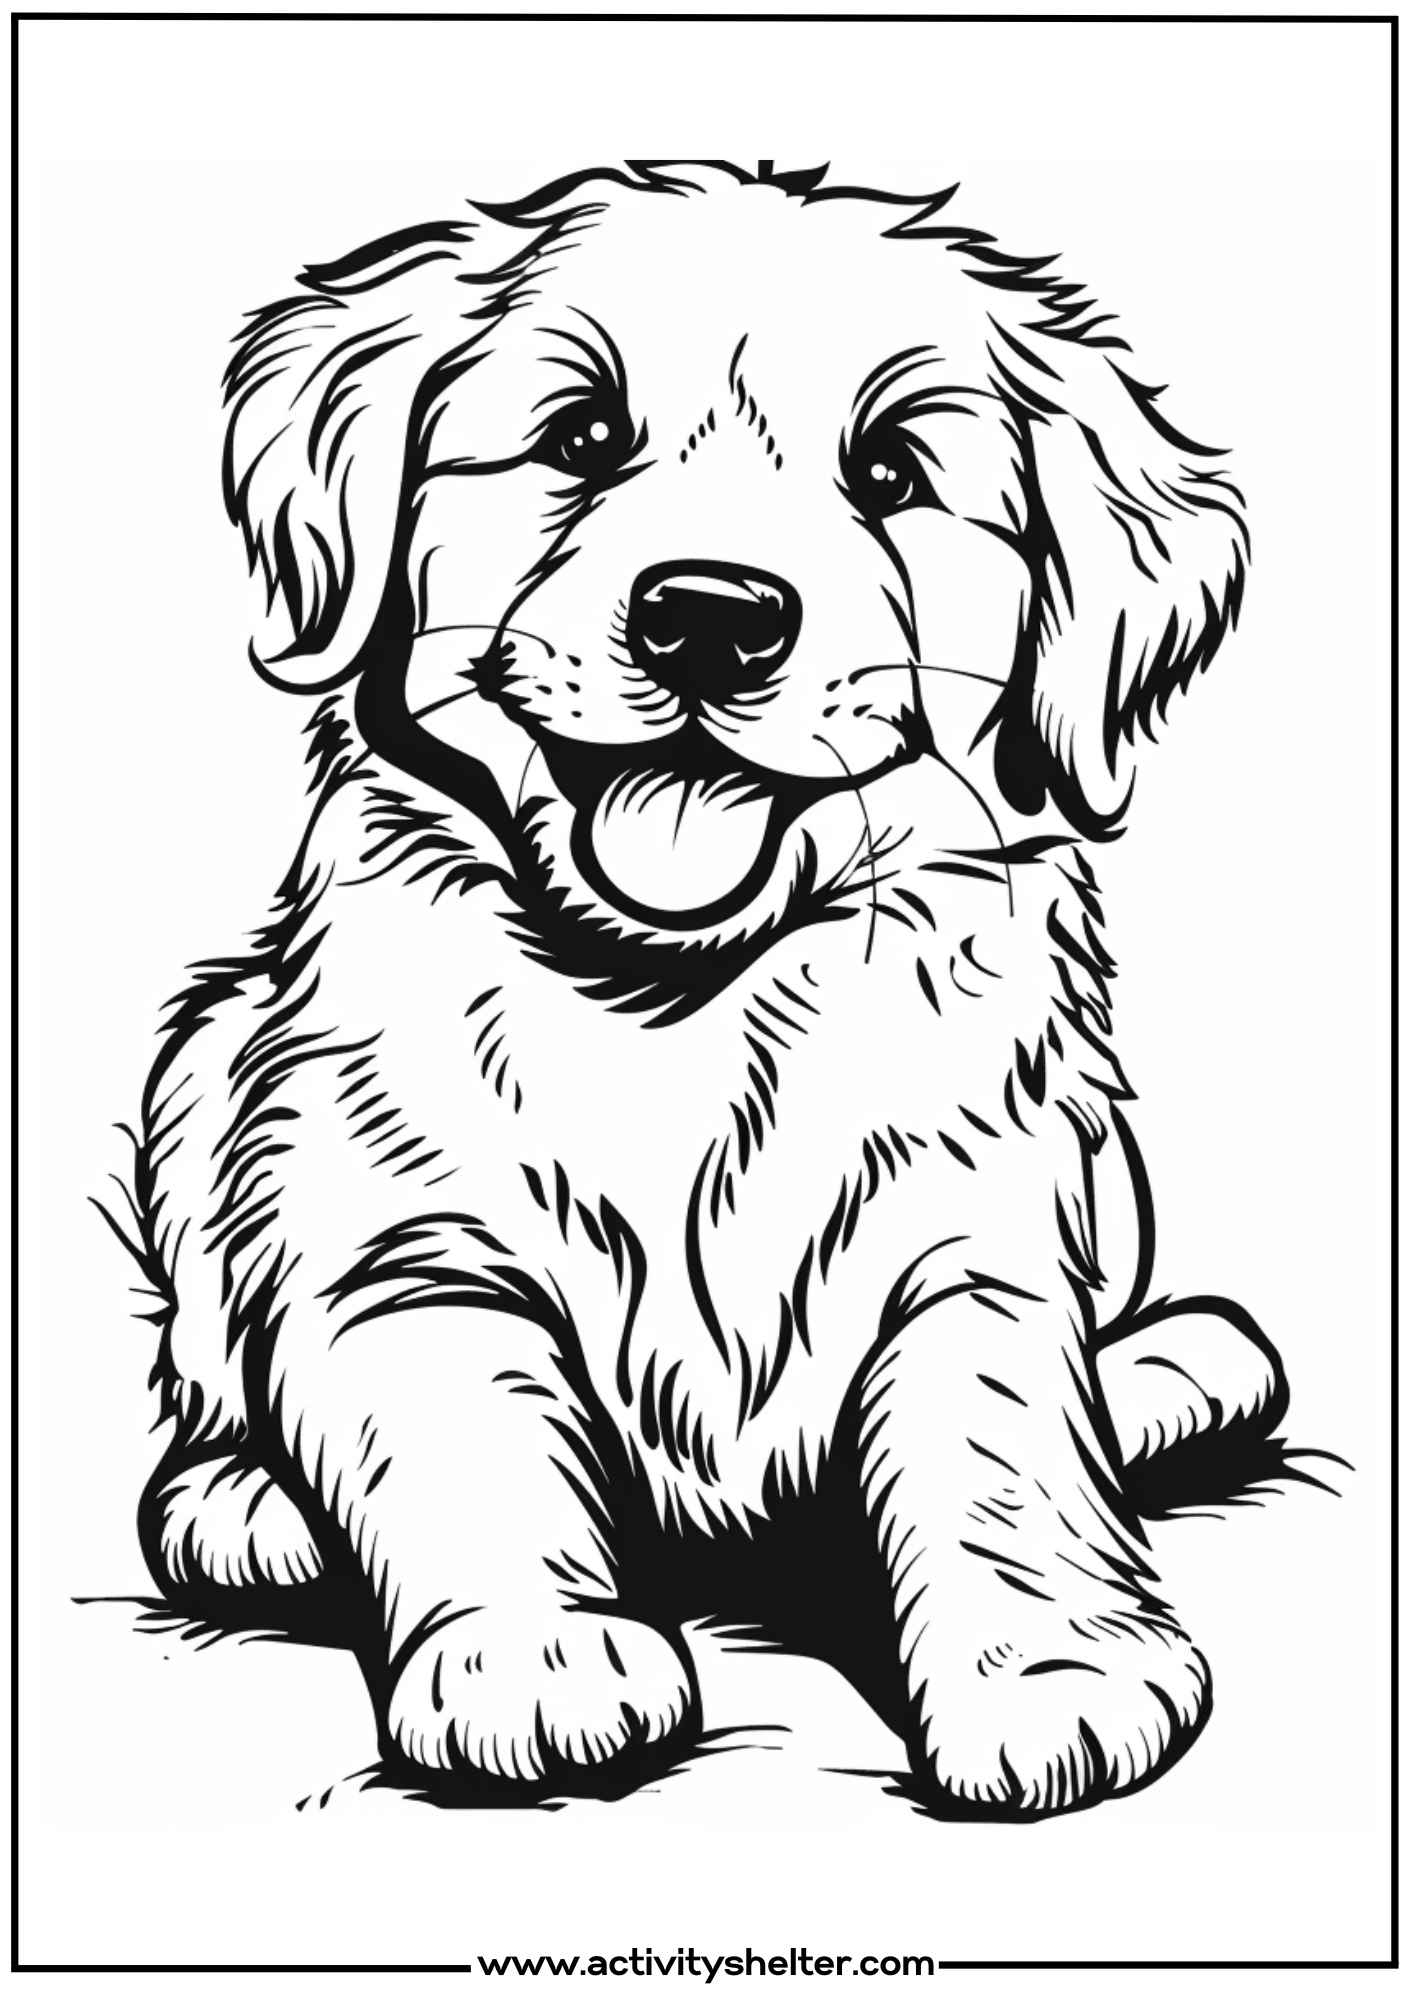 Golden Retriever Puppy Coloring Page